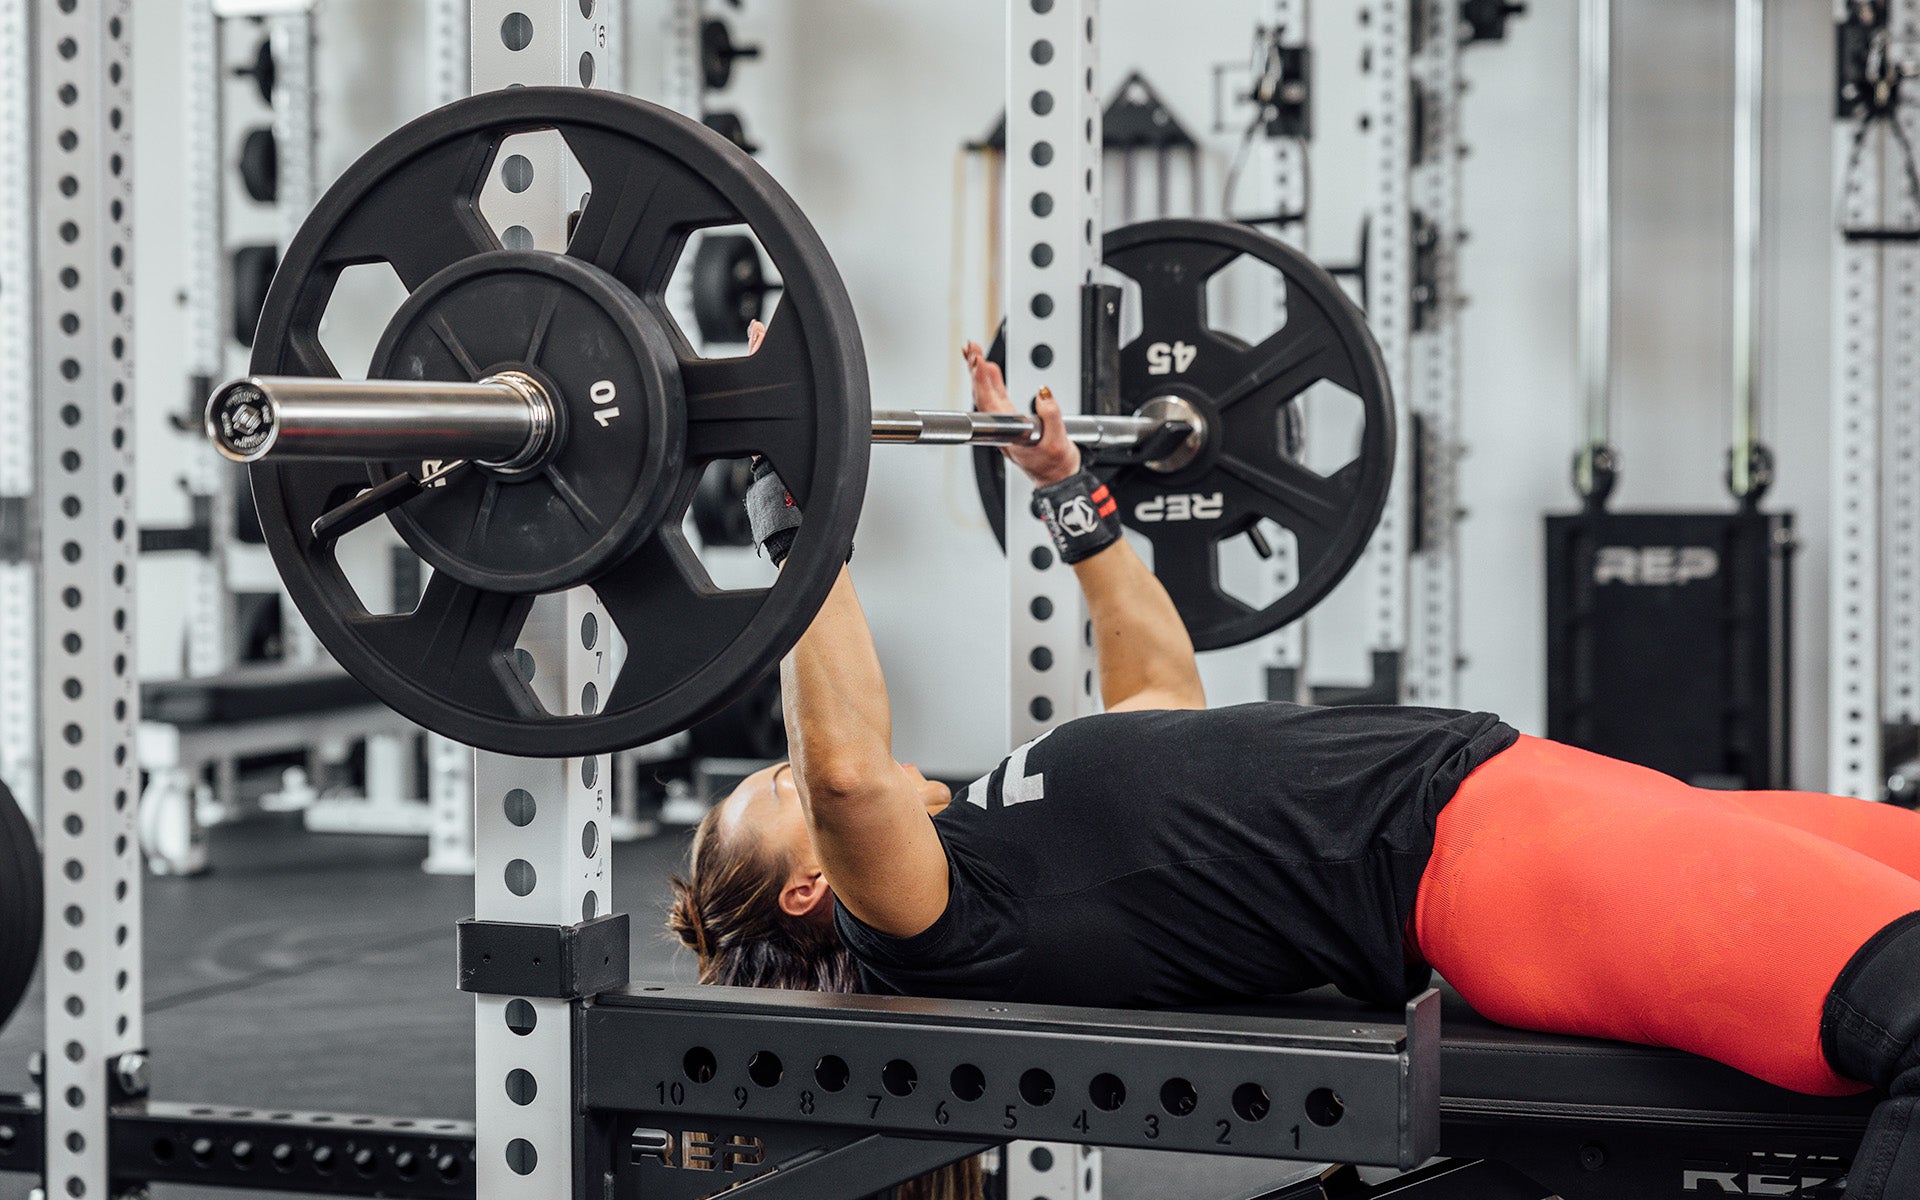 Female lifter preparing to perform a bench press with a loaded REP Double Black Diamond Power Bar.